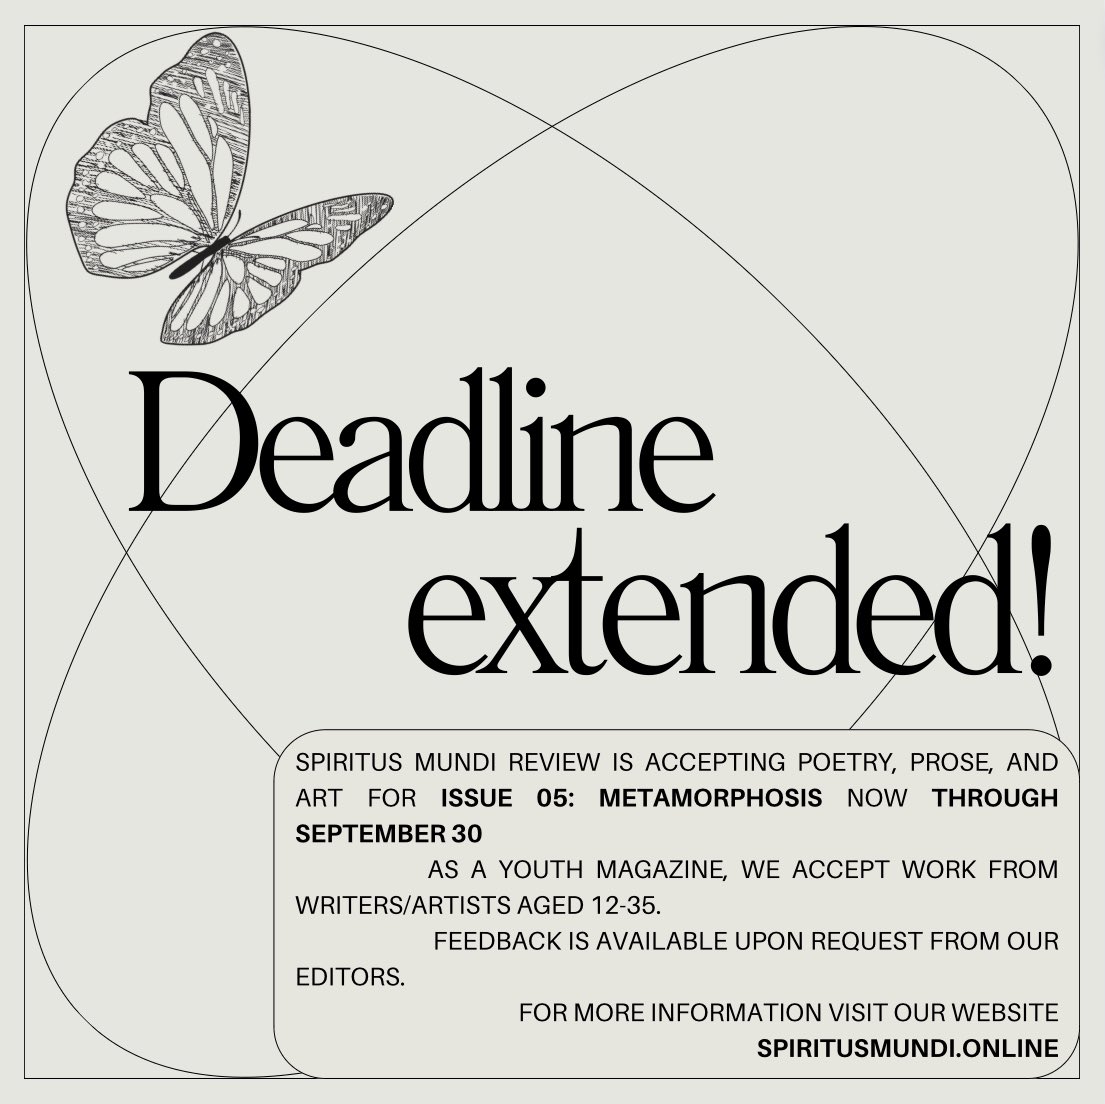 The deadline for Issue 05: Metamorphosis has been extended to September 30! Keep submitting your poetry, prose, and art! 🫶

For those who already submitted, thank you! Our editors are reviewing your work and will have feedback soon! 💌

#submitnow 🦋